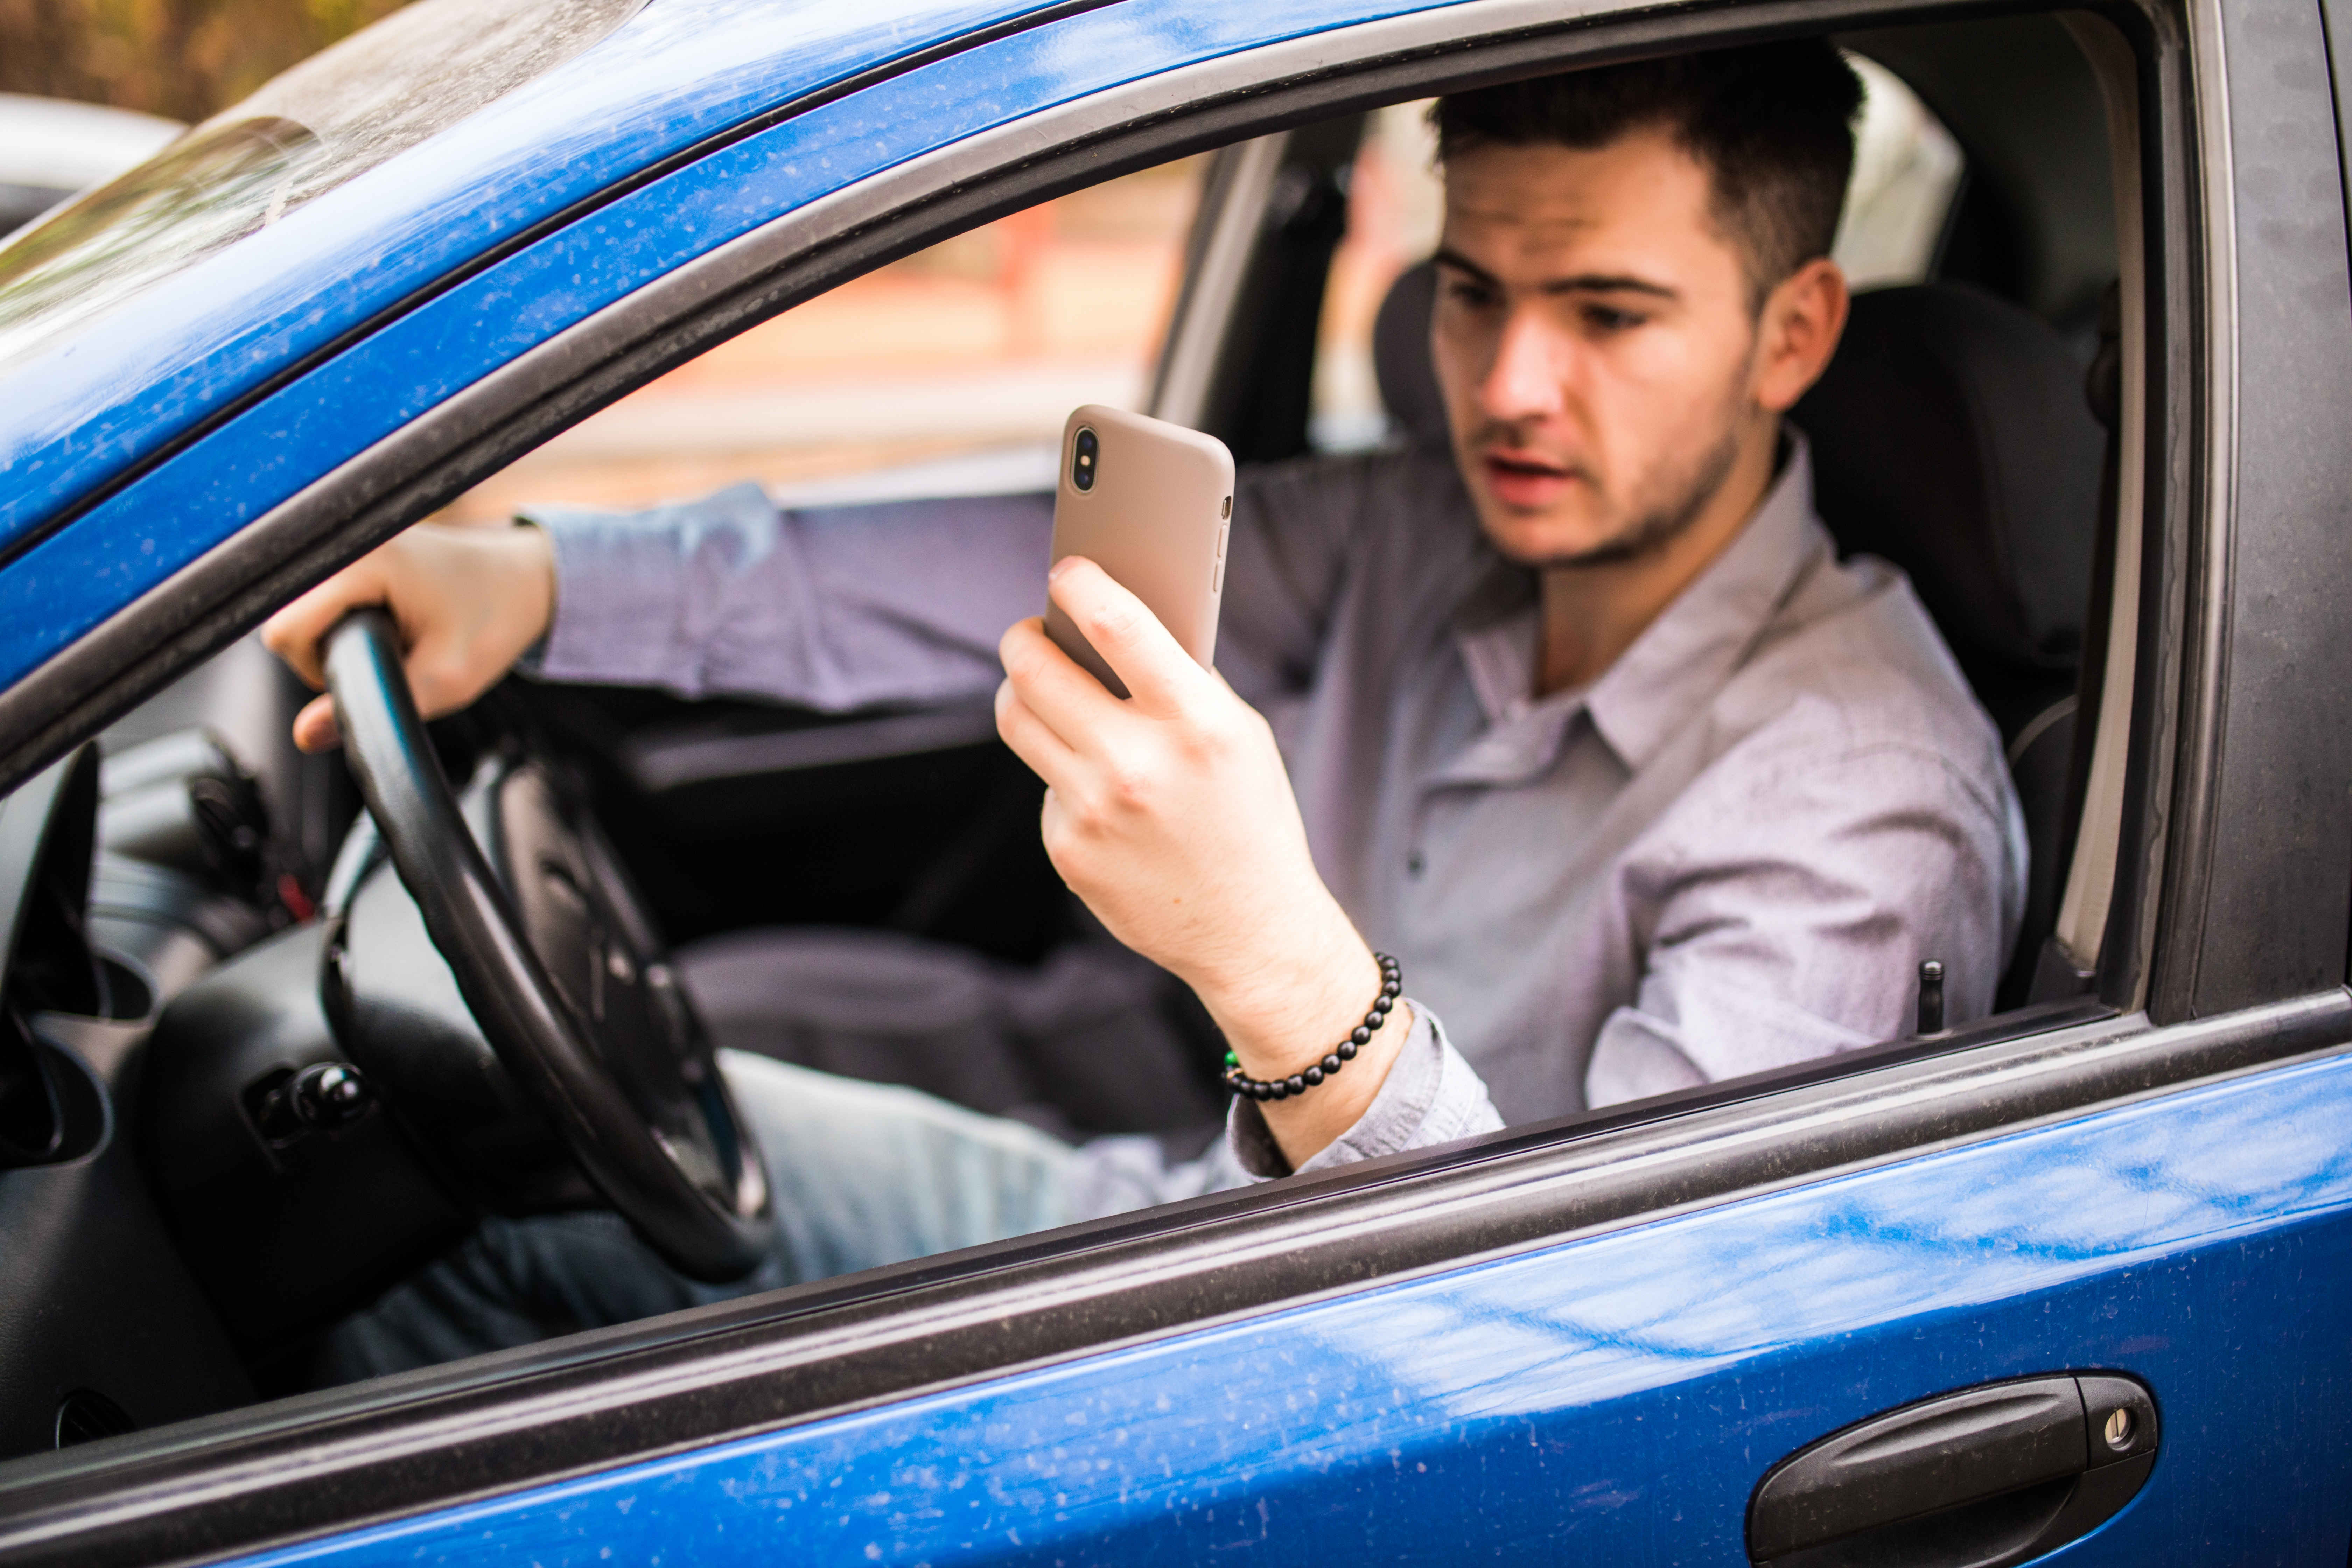 Why Should I Avoid Using A Cell Phone While Driving?